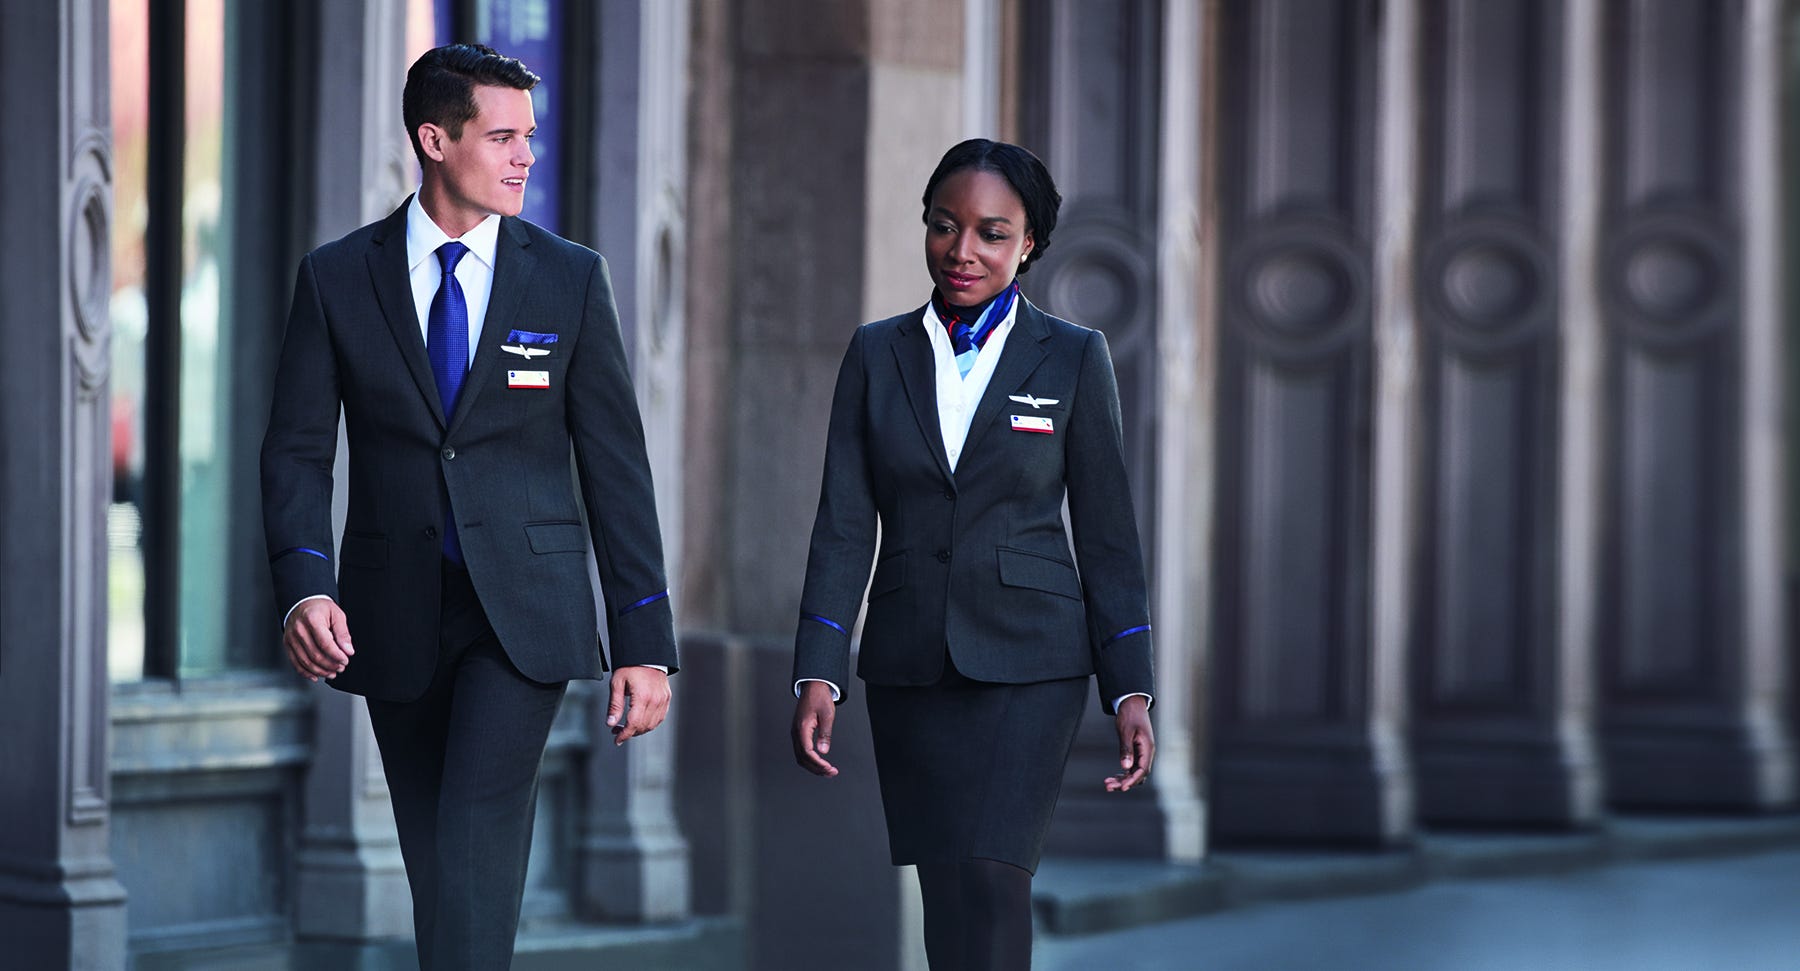 American Airlines flight attendants sue, say new uniforms are 'toxic'